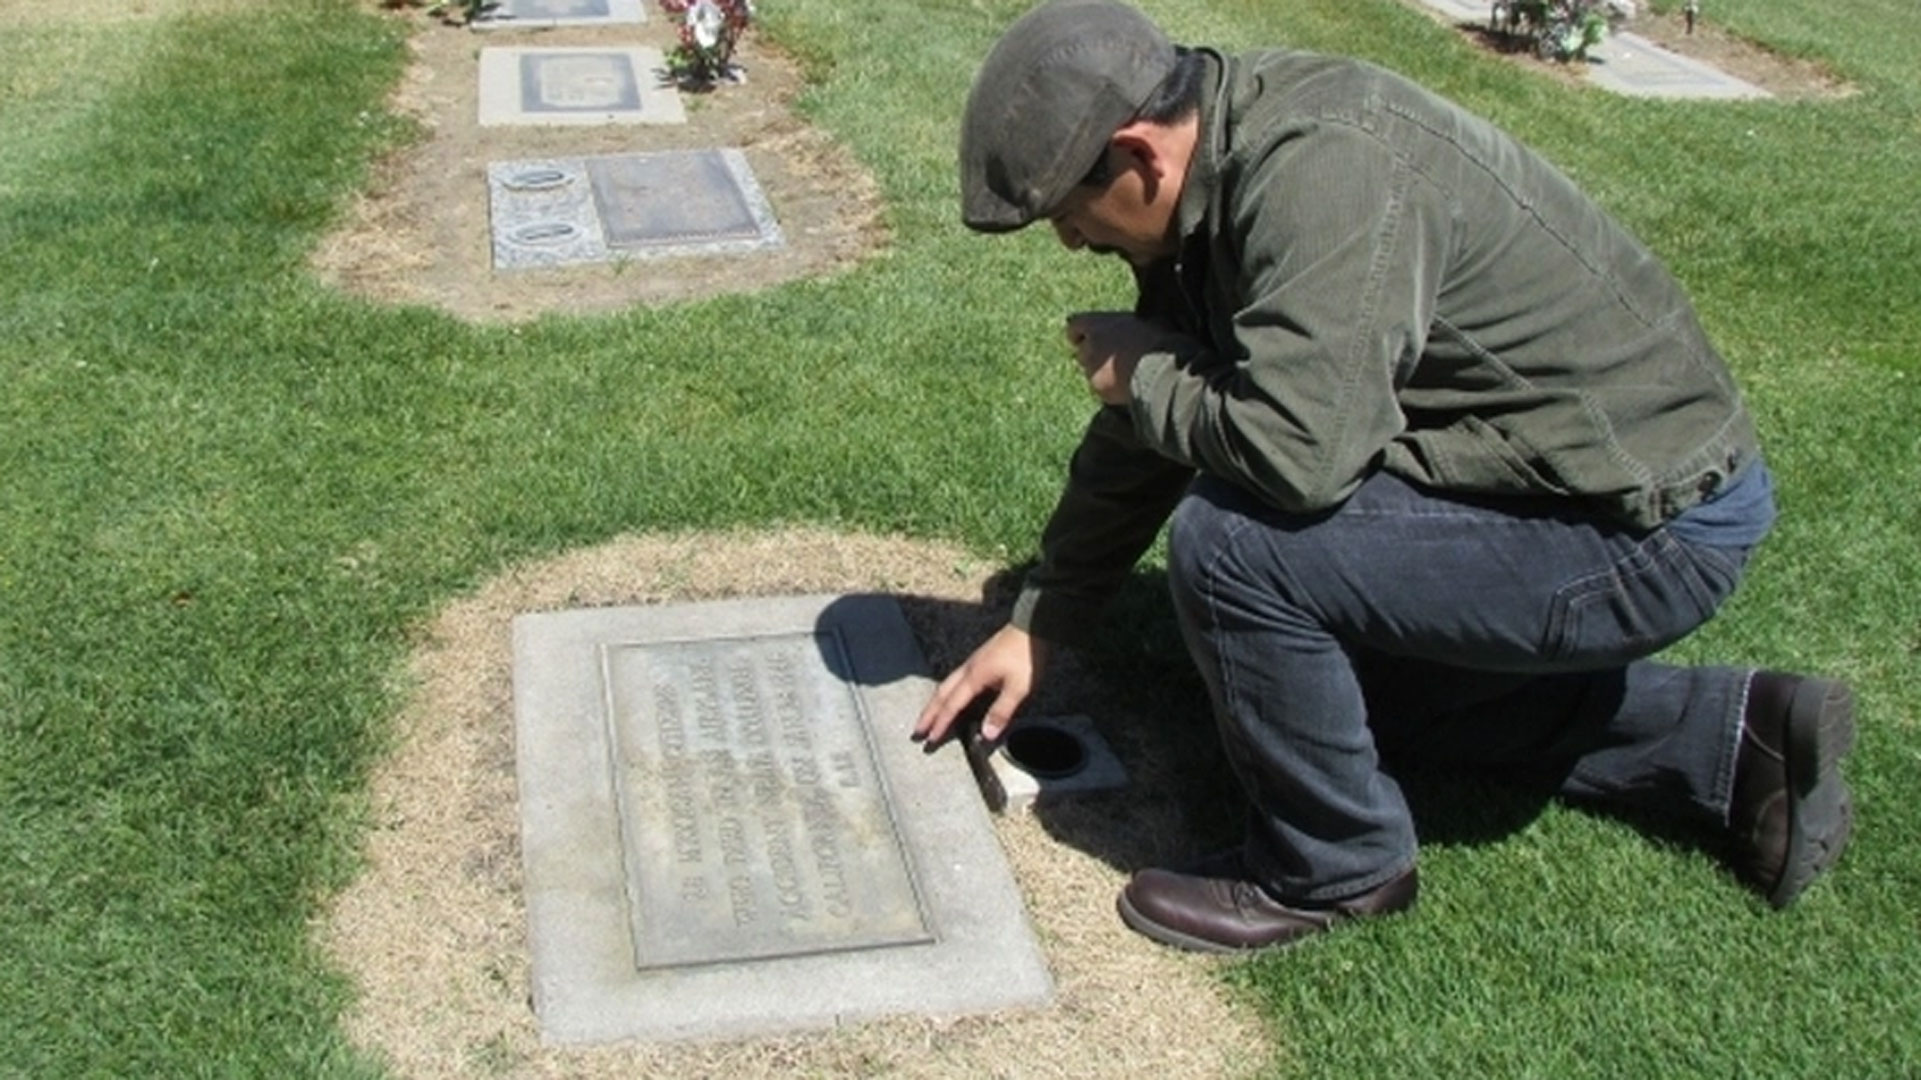 University associate professor and author, Tim Z. Hernandez, visits the headstone in Fresno where most of the 1948 airplane crash victims were buried. 